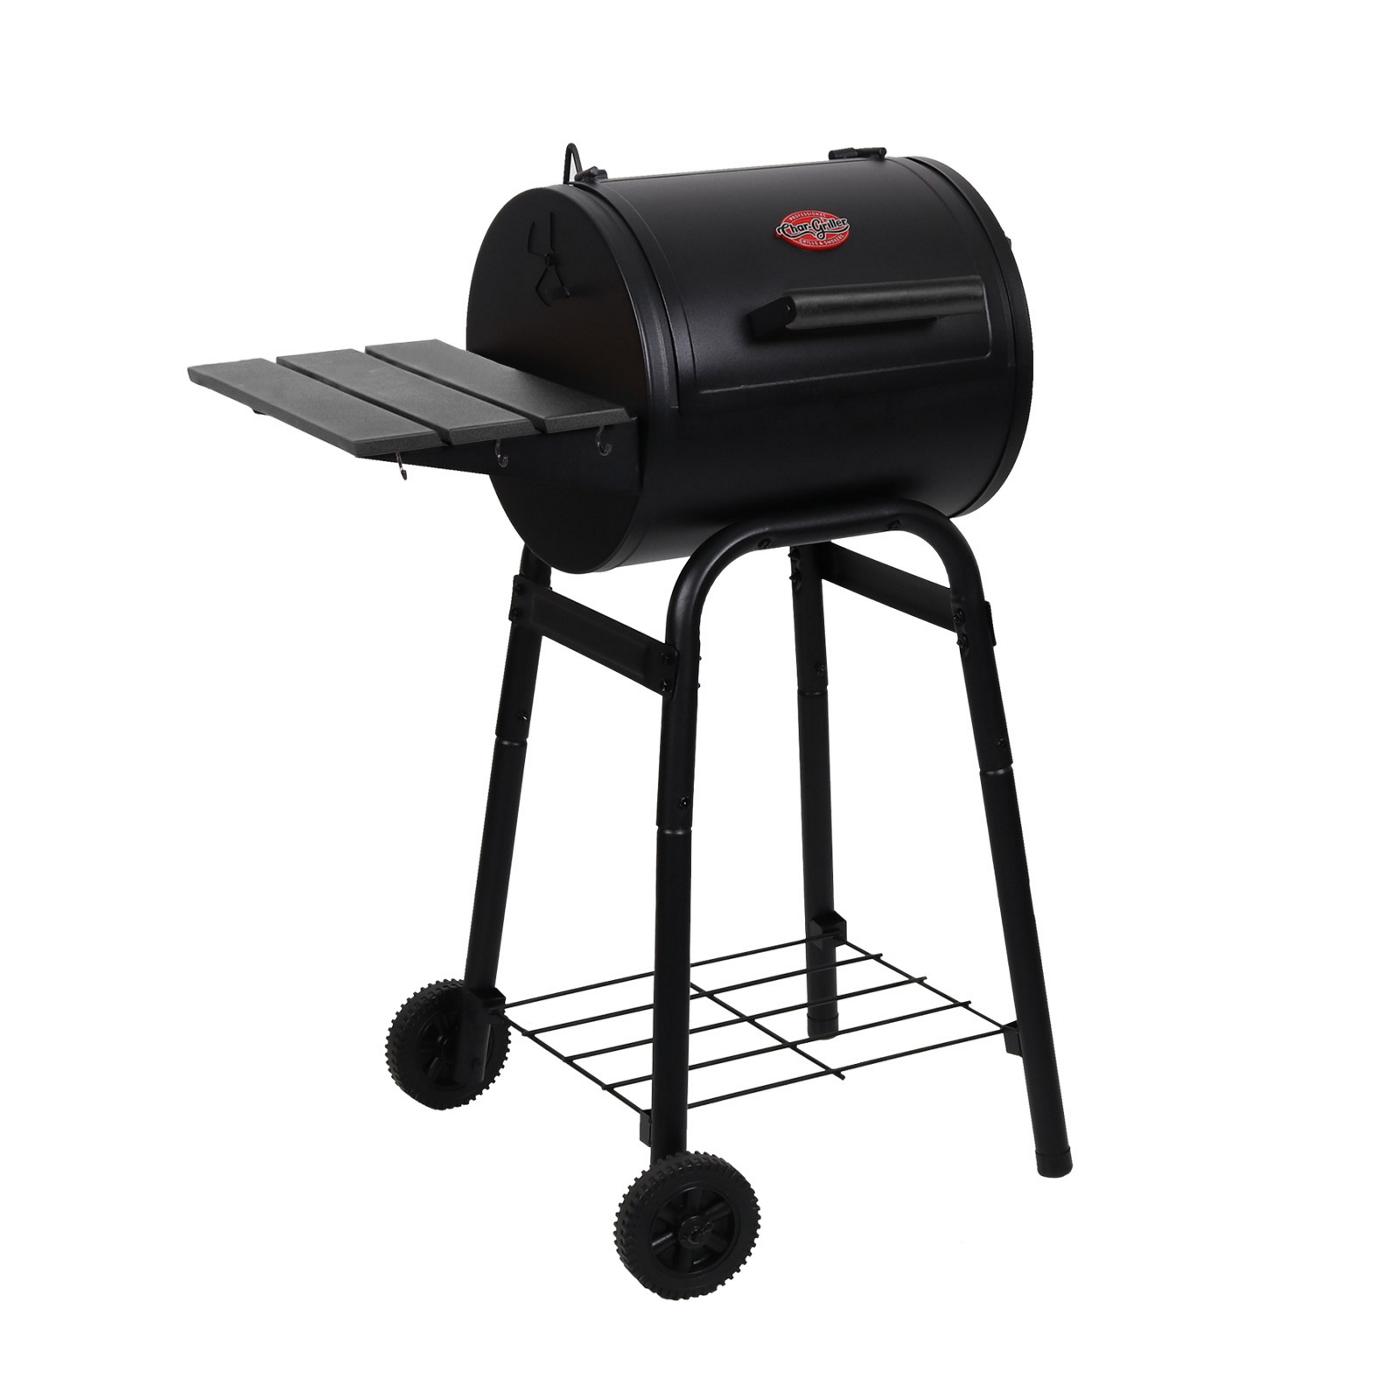 Char-Griller Patio Pro Charcoal Grill; image 3 of 4